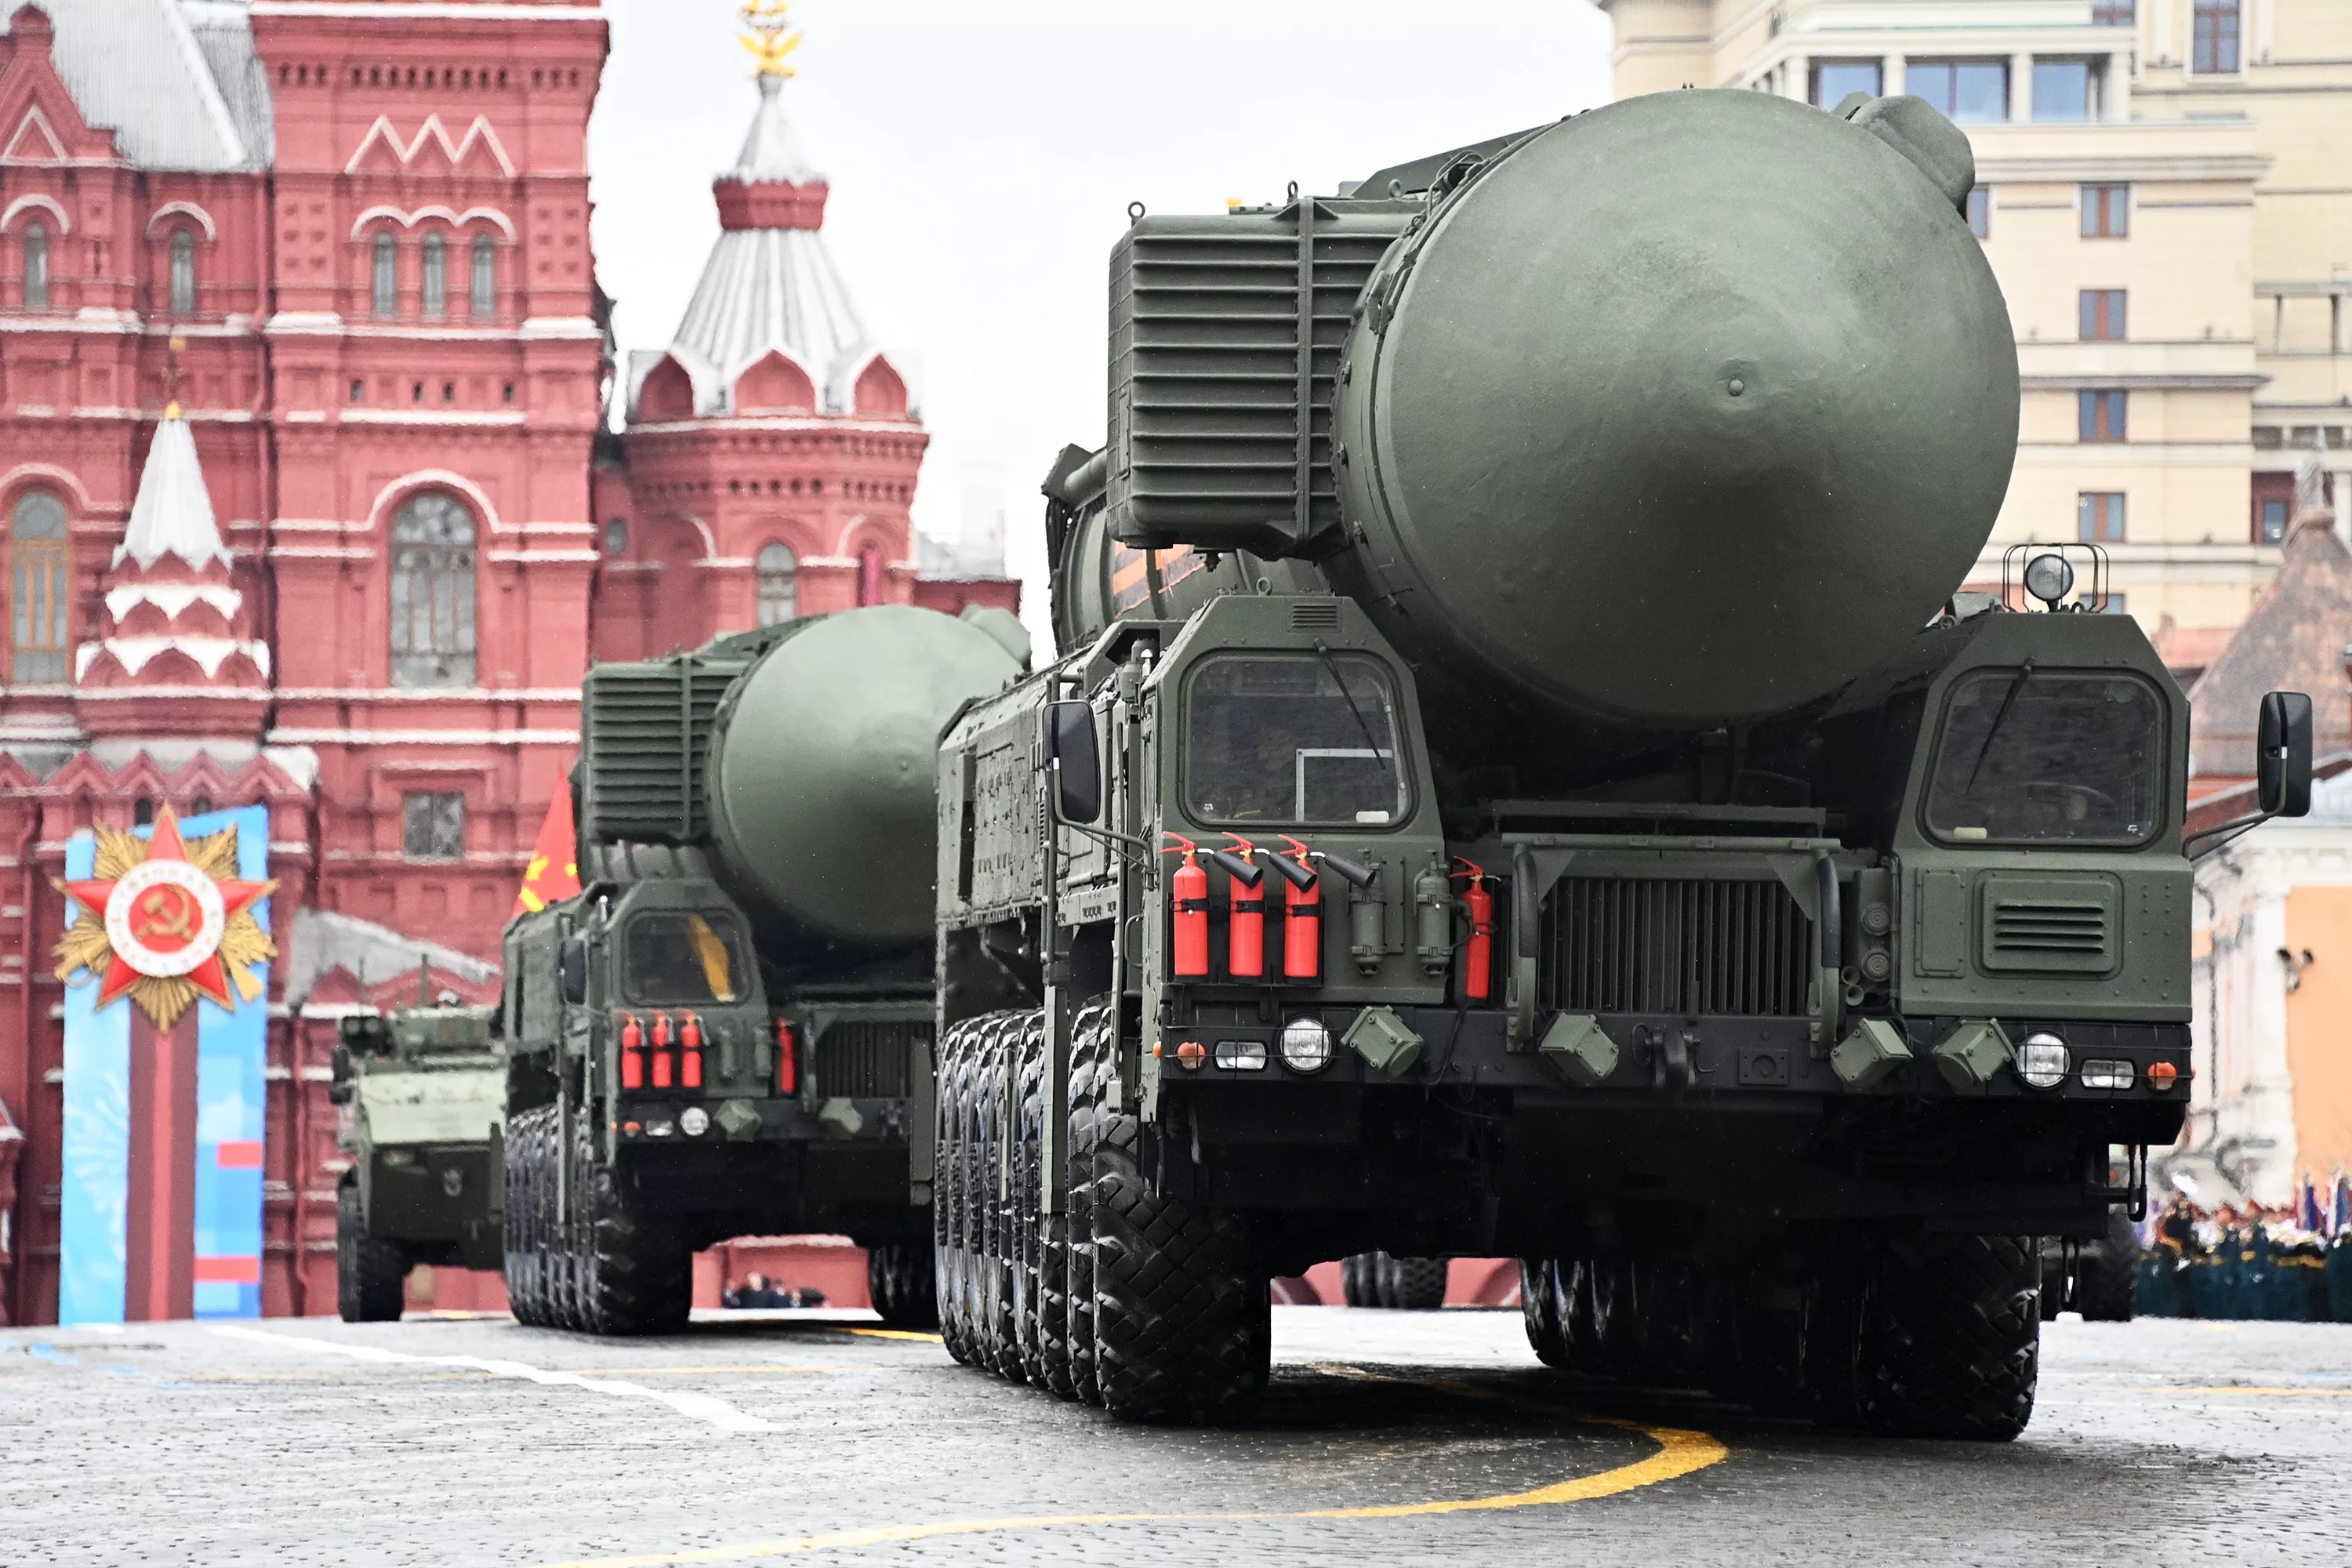 The Russians have launched the SS-27 Mod 2 intercontinental ballistic missile with a range of 12,000 kilometres, which can carry a nuclear warhead with a yield of up to 500 kilotons-3